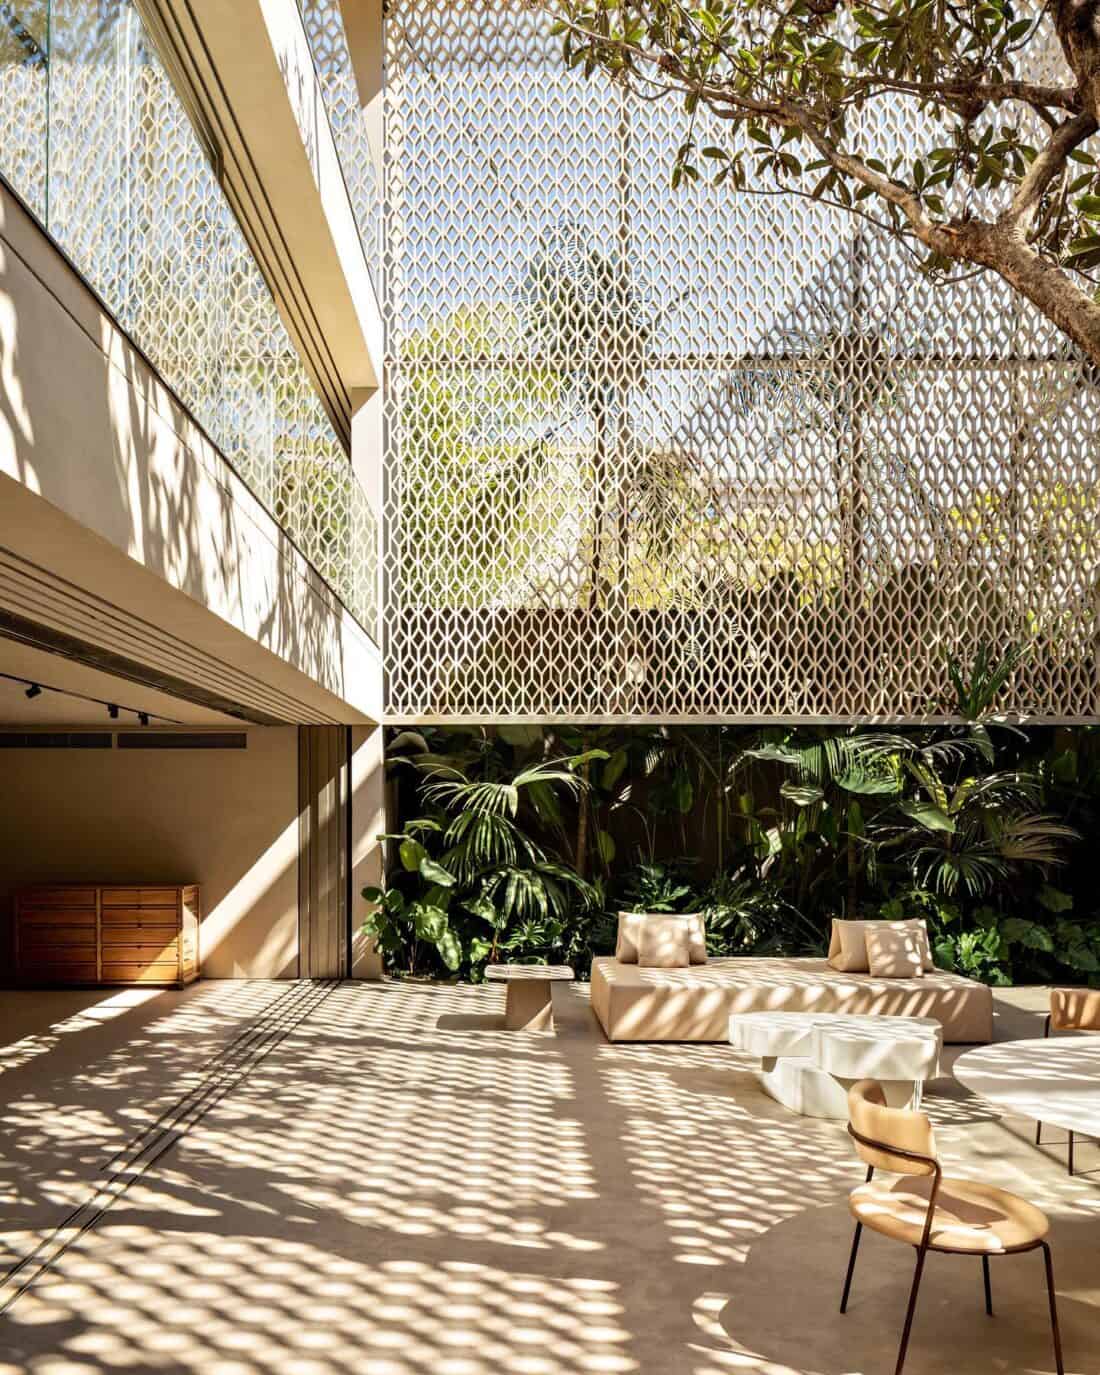 A courtyard in a building with a tree in the middle. Filligree breeze blocks by arthur casas design.